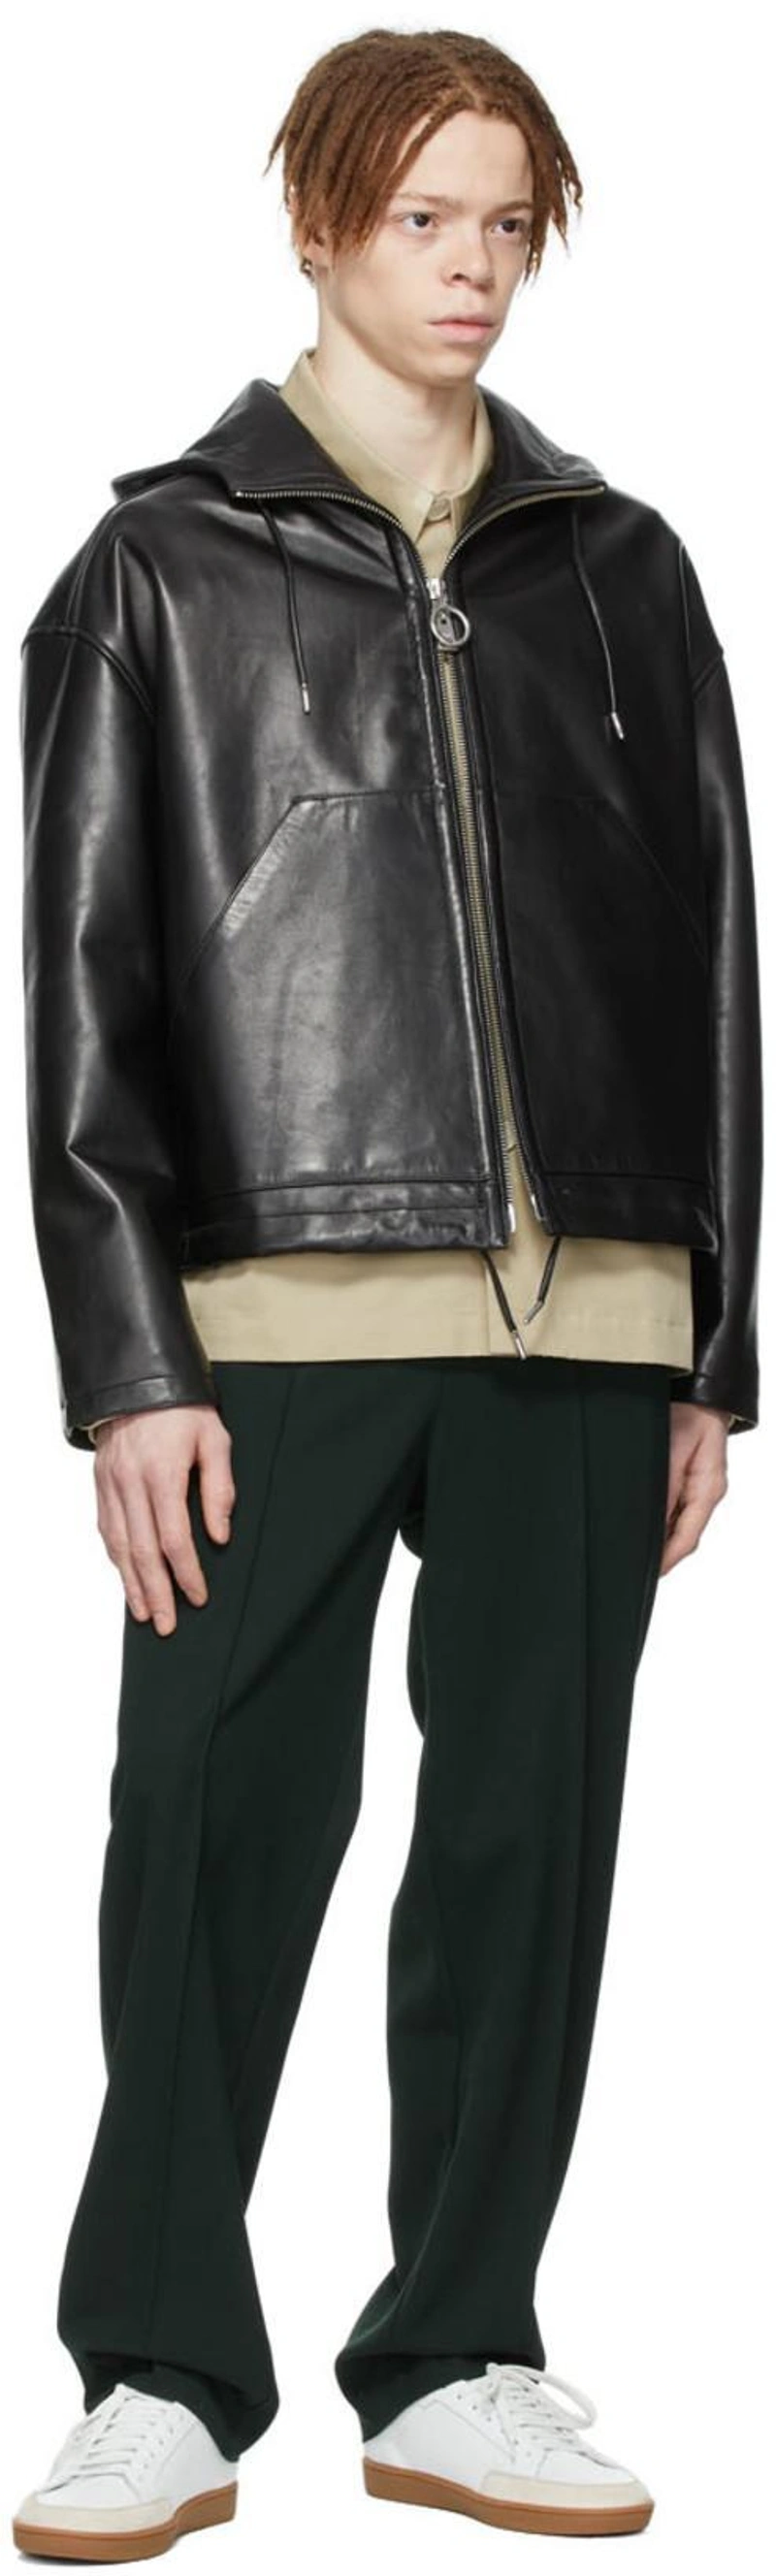 SSENSE's Post | 搭配: Saint Laurent Court Classic Sl10 Sneakers In White；Ami Alexandre Mattiussi Green Polyester Trousers In Evergreen/311；Ami Alexandre Mattiussi Black Leather Jacket In Black/001